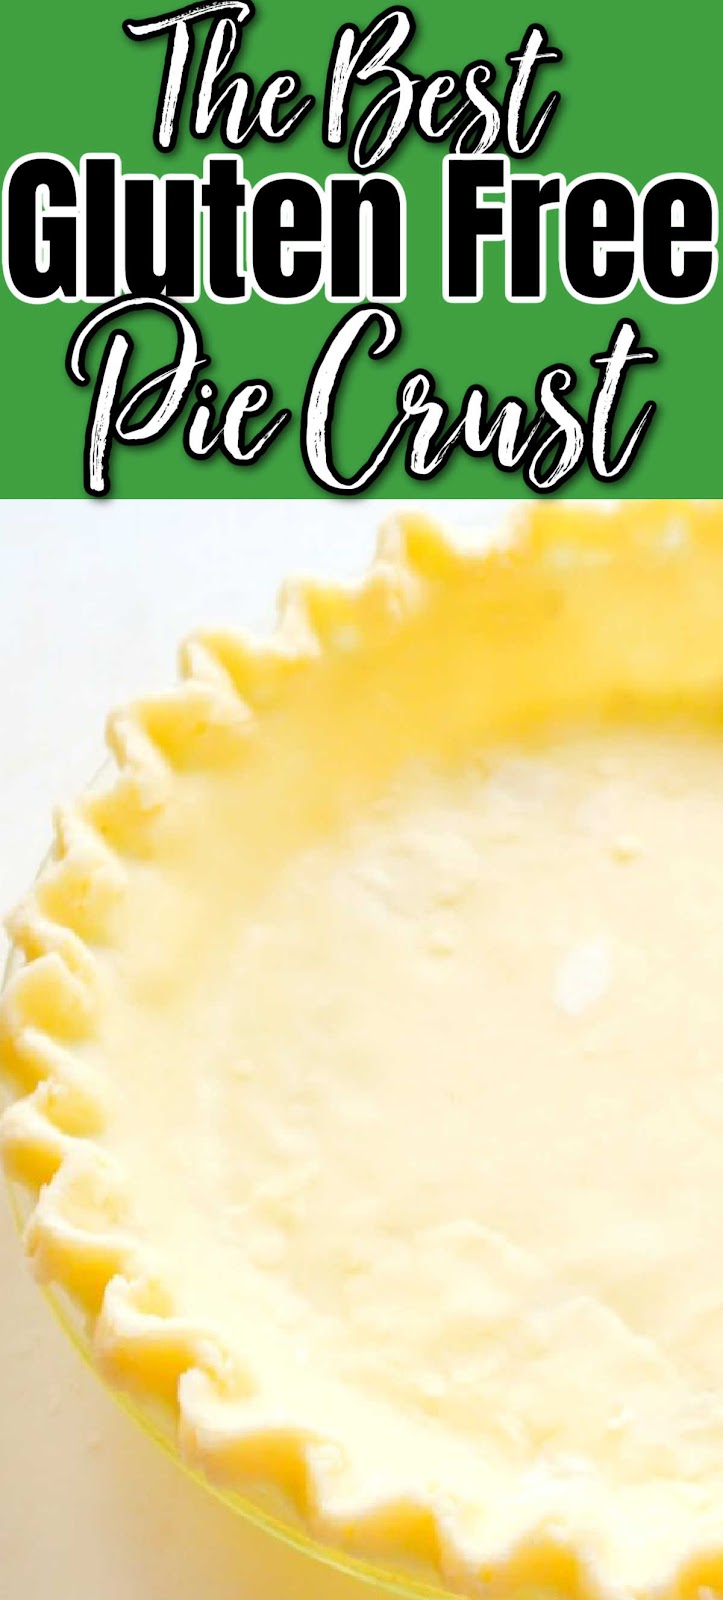 A down shot of half a Gluten Free Pie Crust unbaked in a glass pie pan. A green banner is at the top with white text with black outline The Best, below that in black text with white outline Gluten Free, and below that white text with black outline Pie Crust.